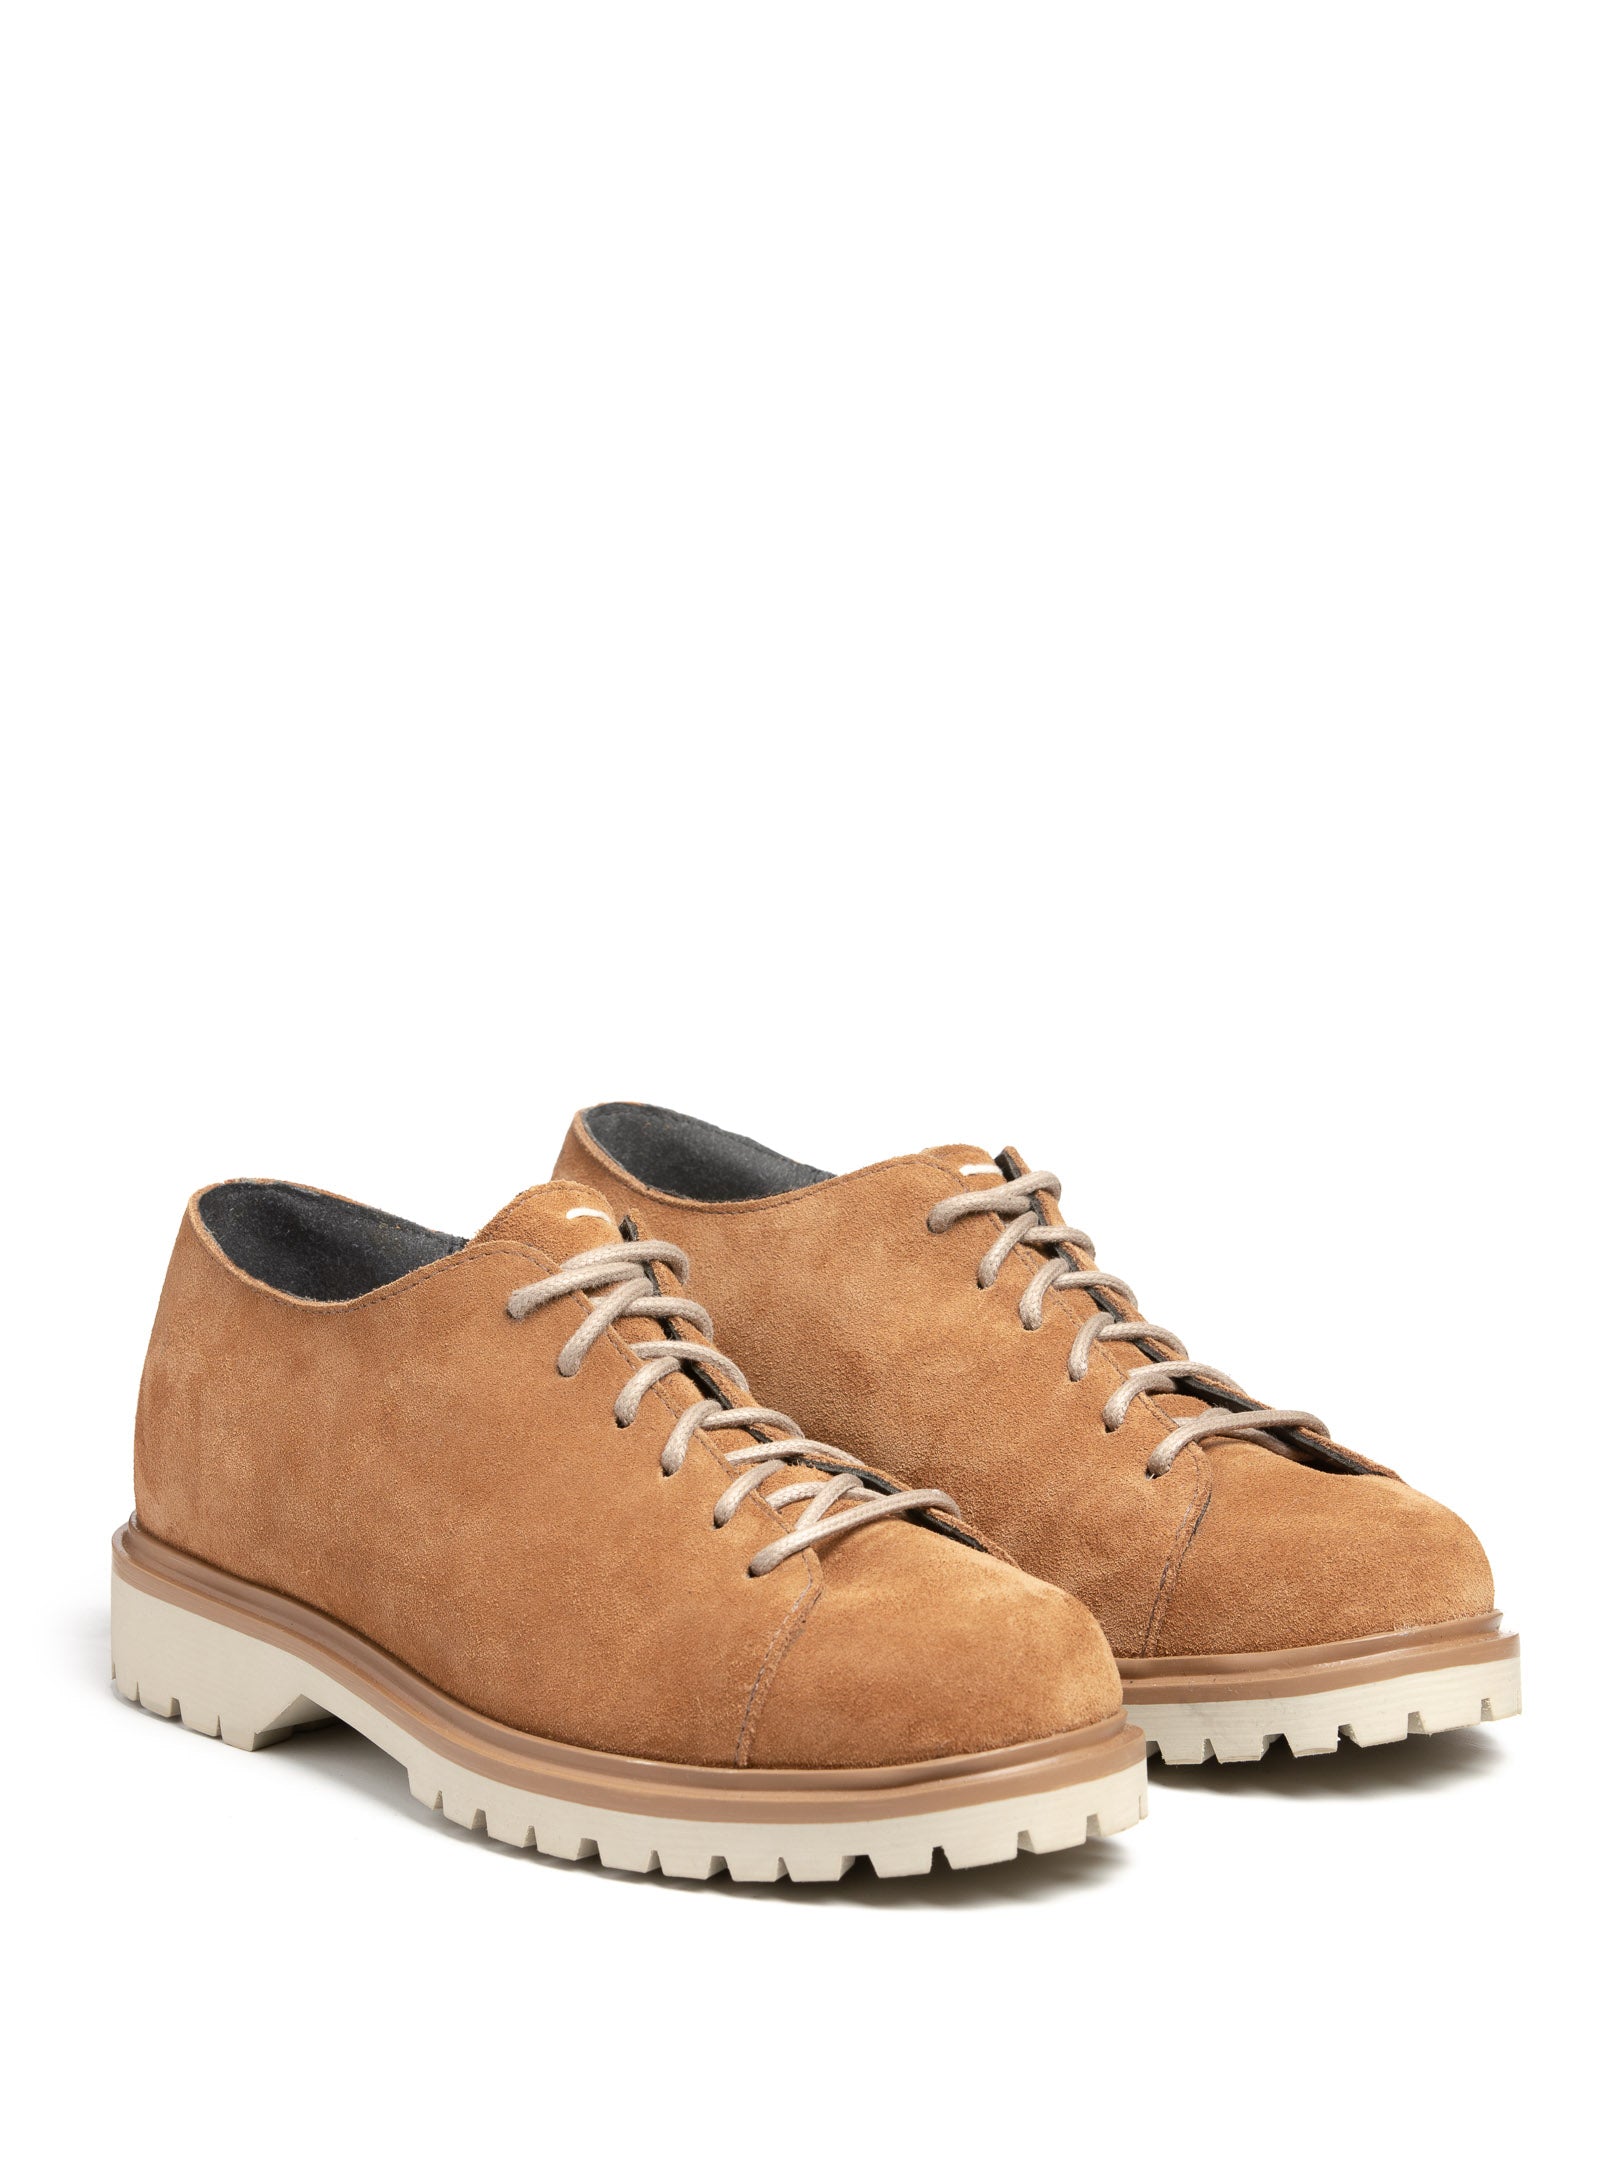 DELUCA.8214 | Women's Suede Shoes | Made in Canada | Anfibio Boots